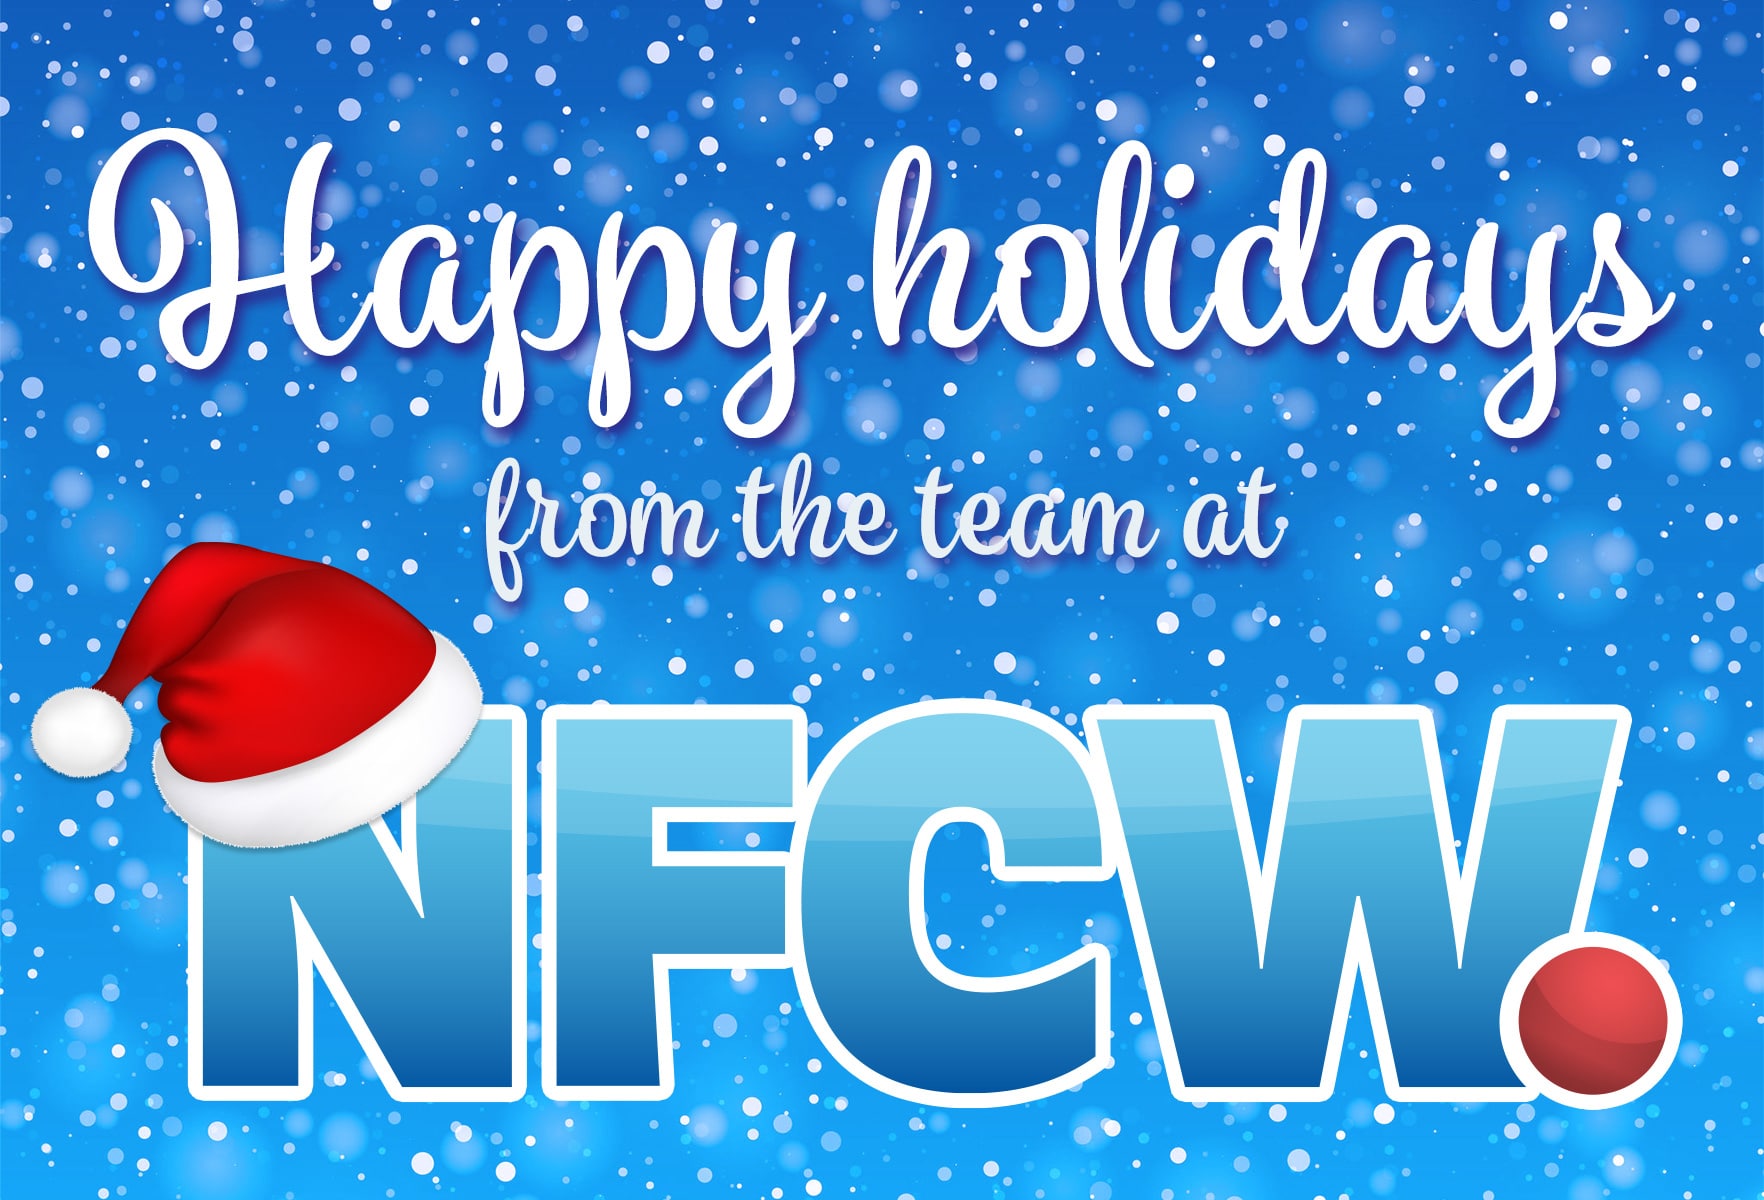 Happy holidays from the team at NFCW